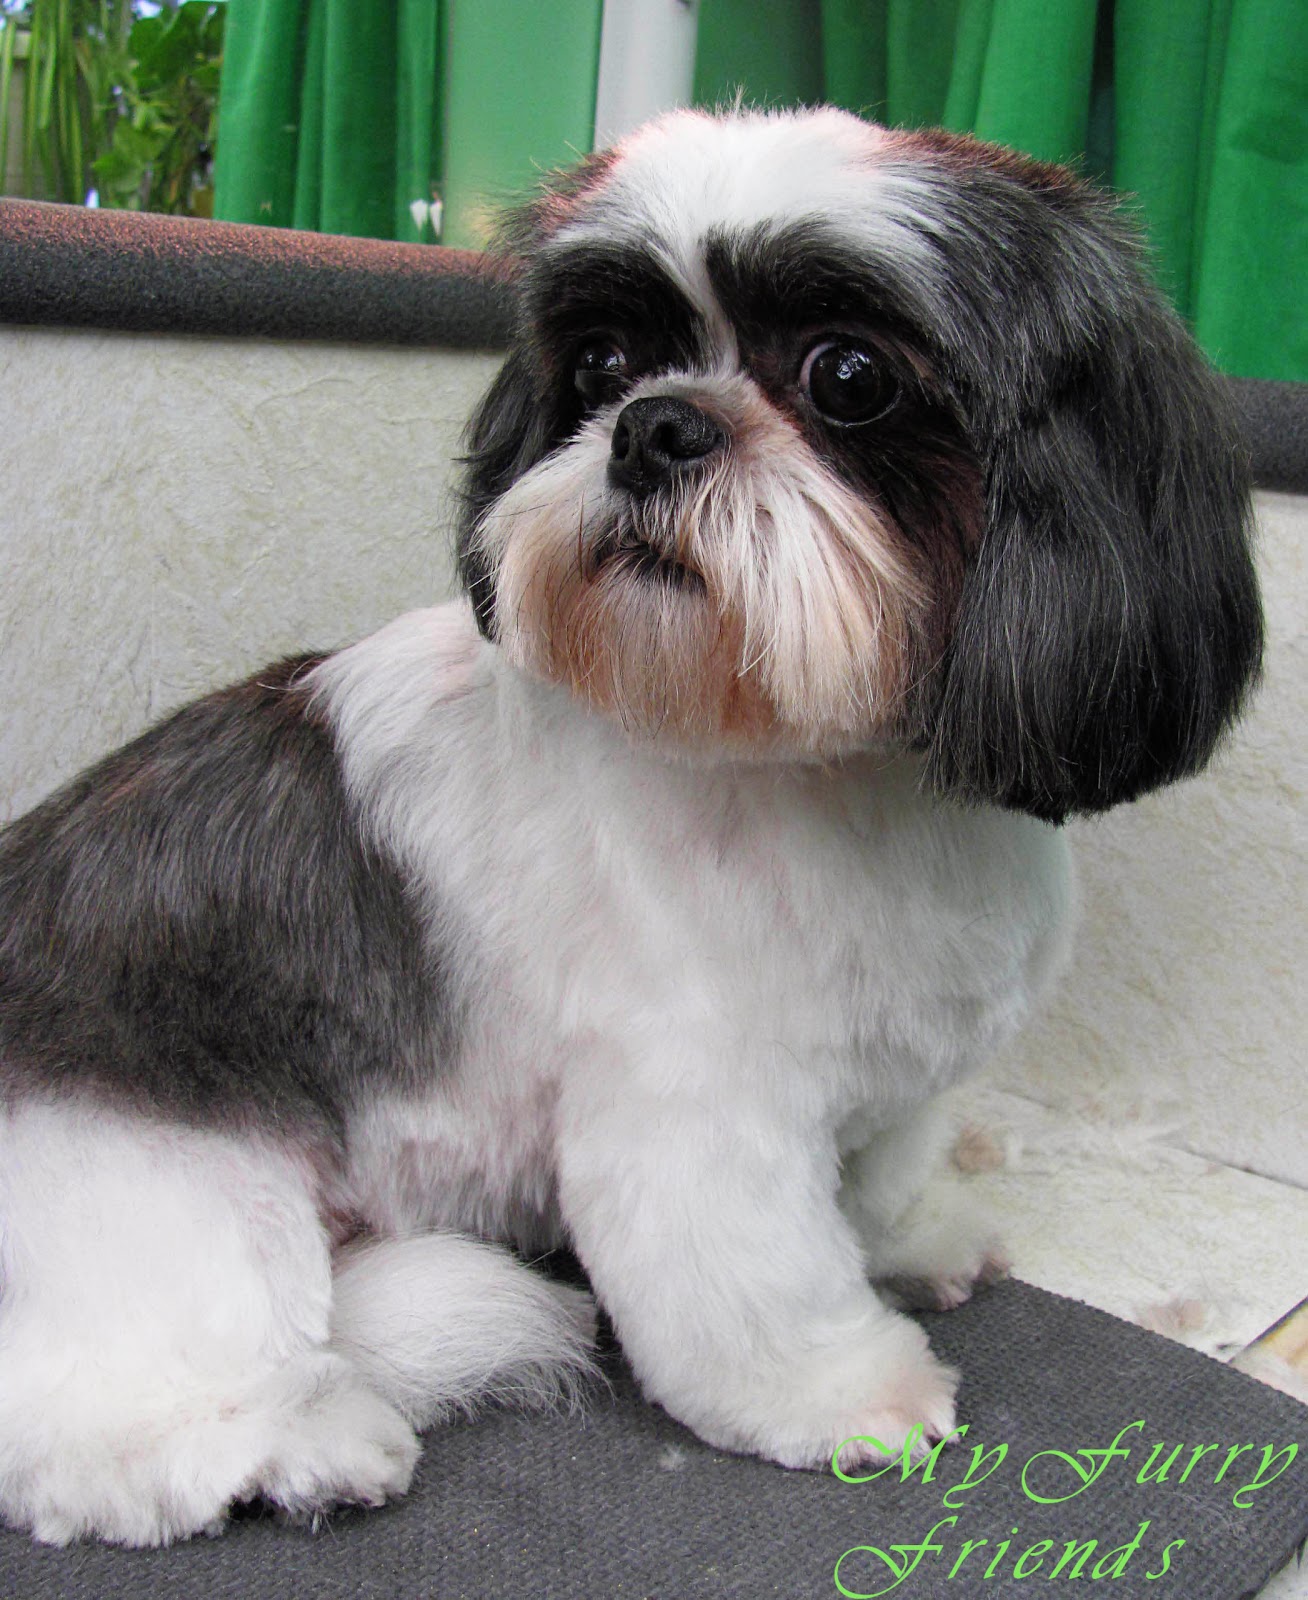 Mohawk Shih Tzu Pictures Of Dogs And All